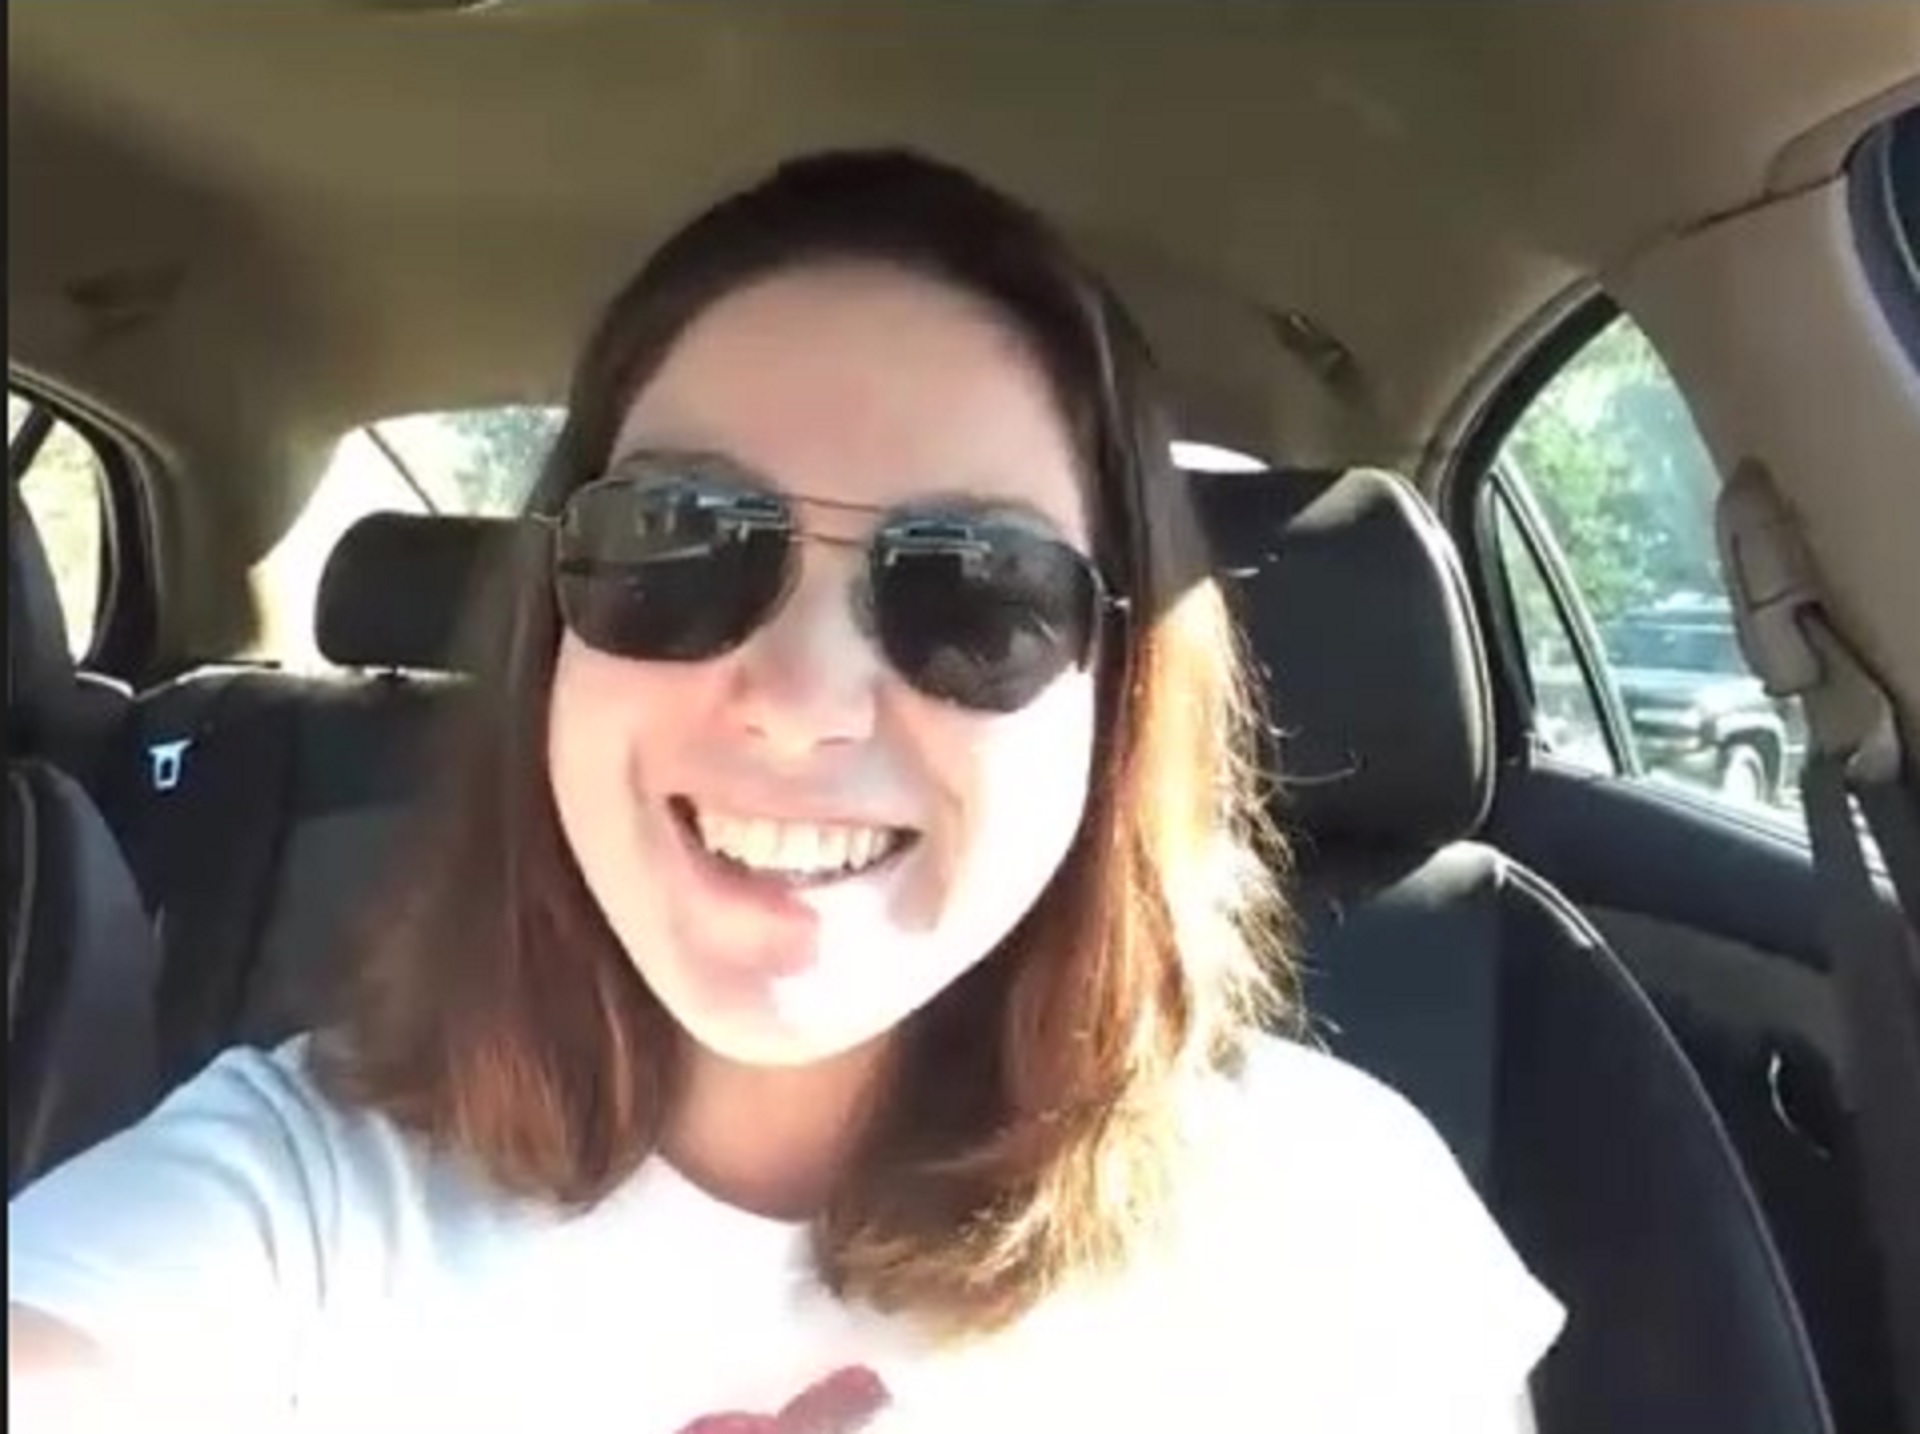 a White woman wearing sunglasses smiling in a car